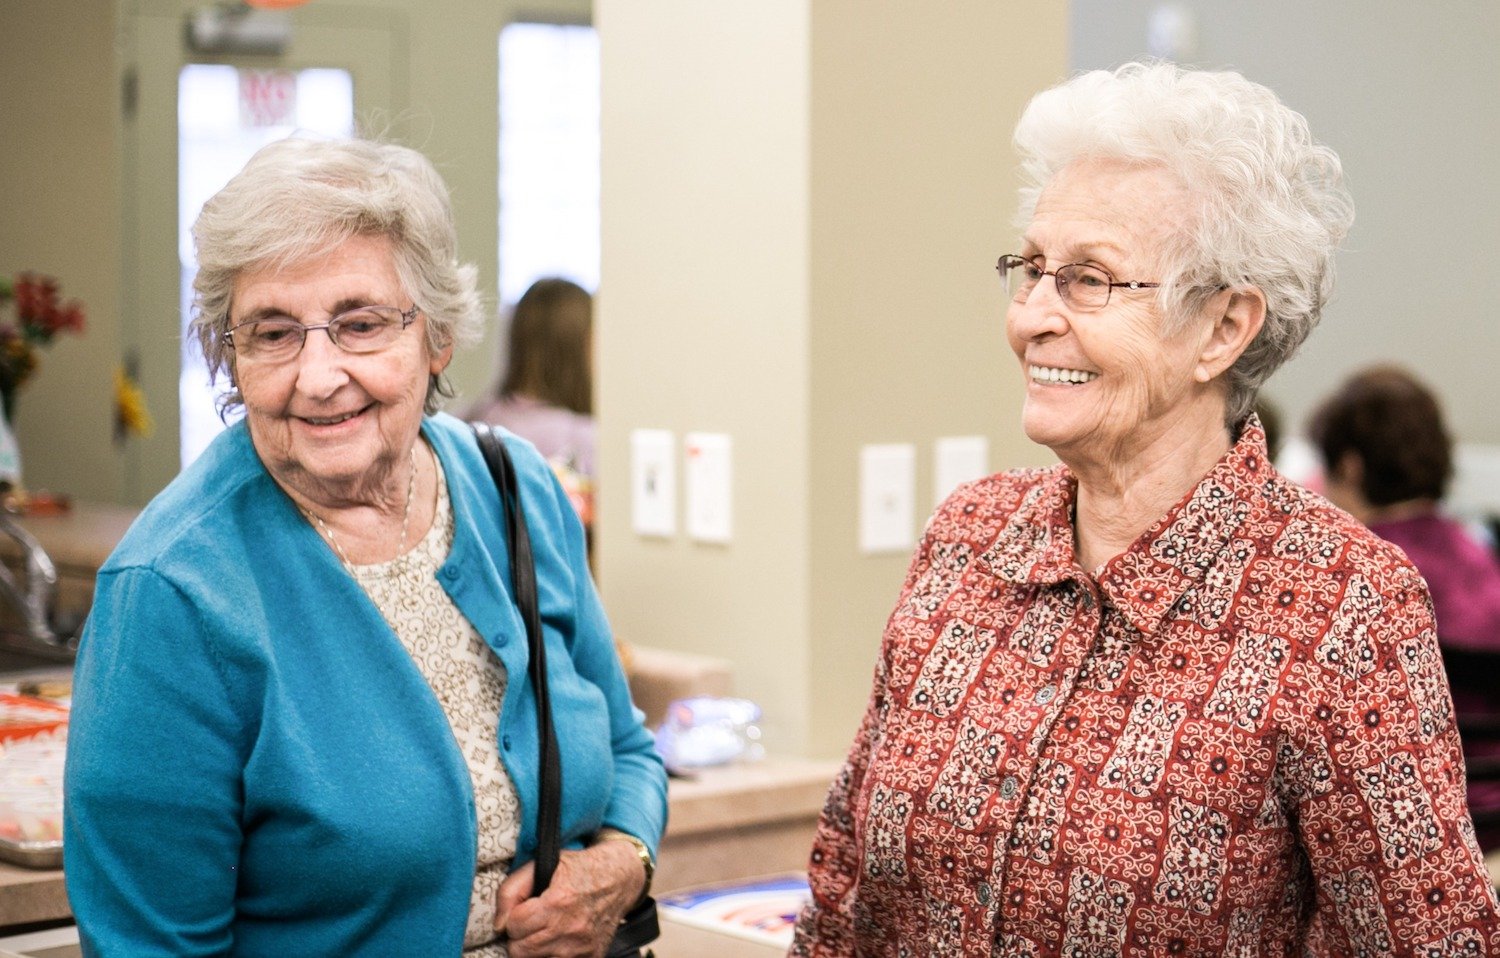 Two senior women smiling together